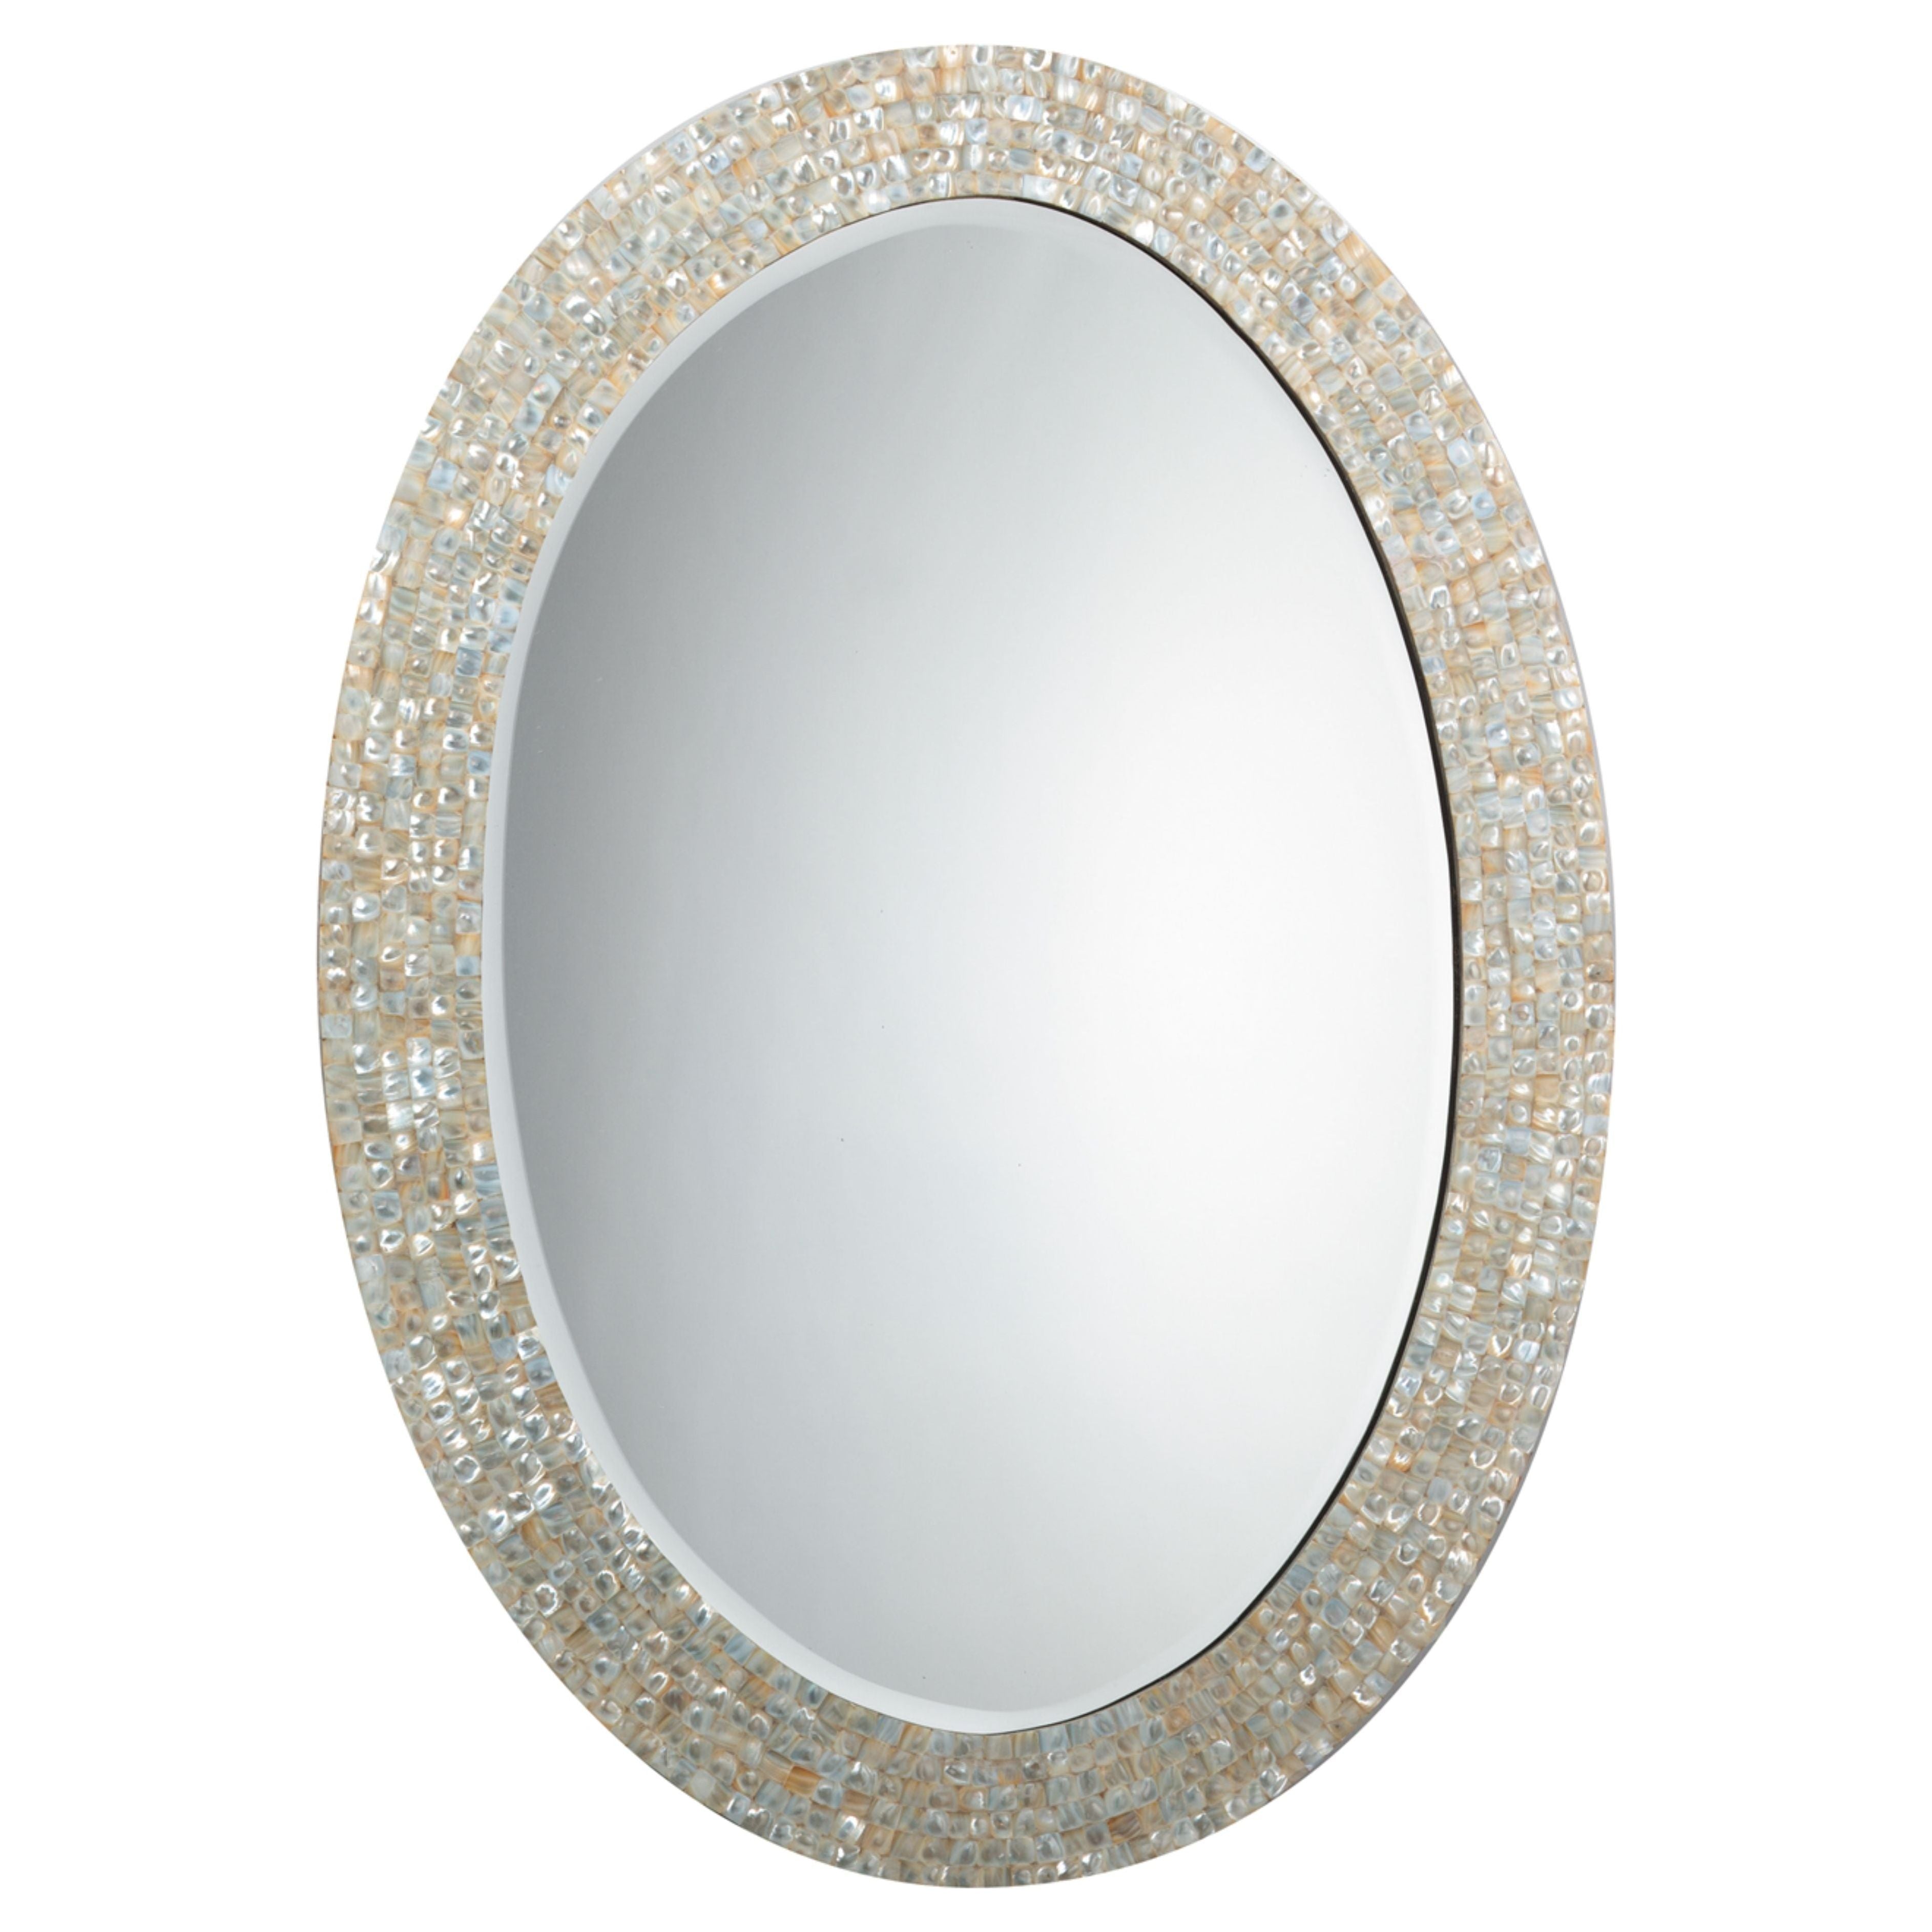 Jamie Young Company - 7OVAL-LGMOP - Oval Mirror -  - Cream